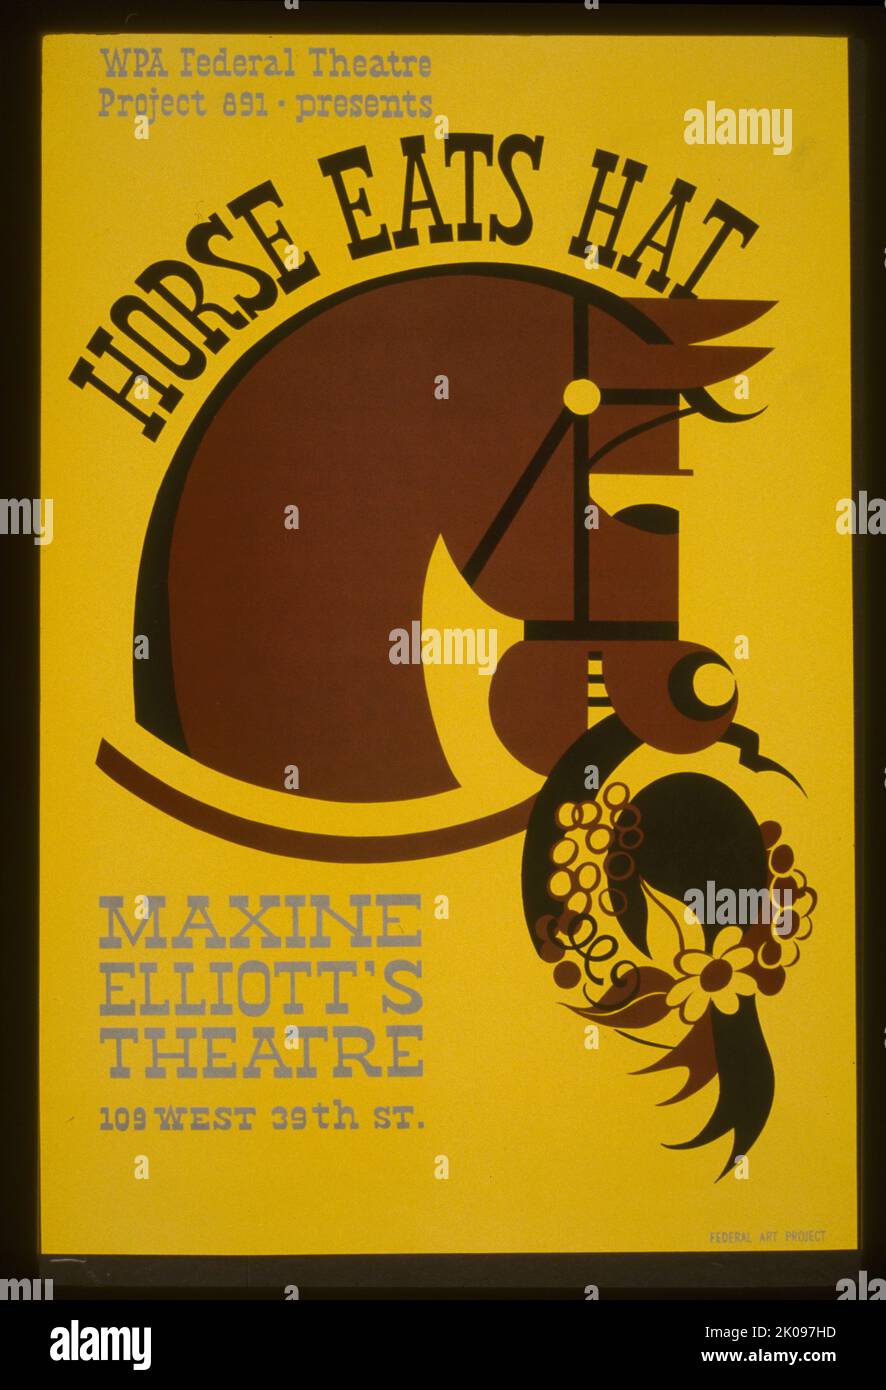 Facsimile of poster for Federal Theatre Project presentation of Horse Eats Hat at Maxine Elliott's Theatre, 109 West 39th St., showing a horse eating a hat. WPA Federal Theatre Project 891 at Maxine Elliott's Theatre. Stock Photo